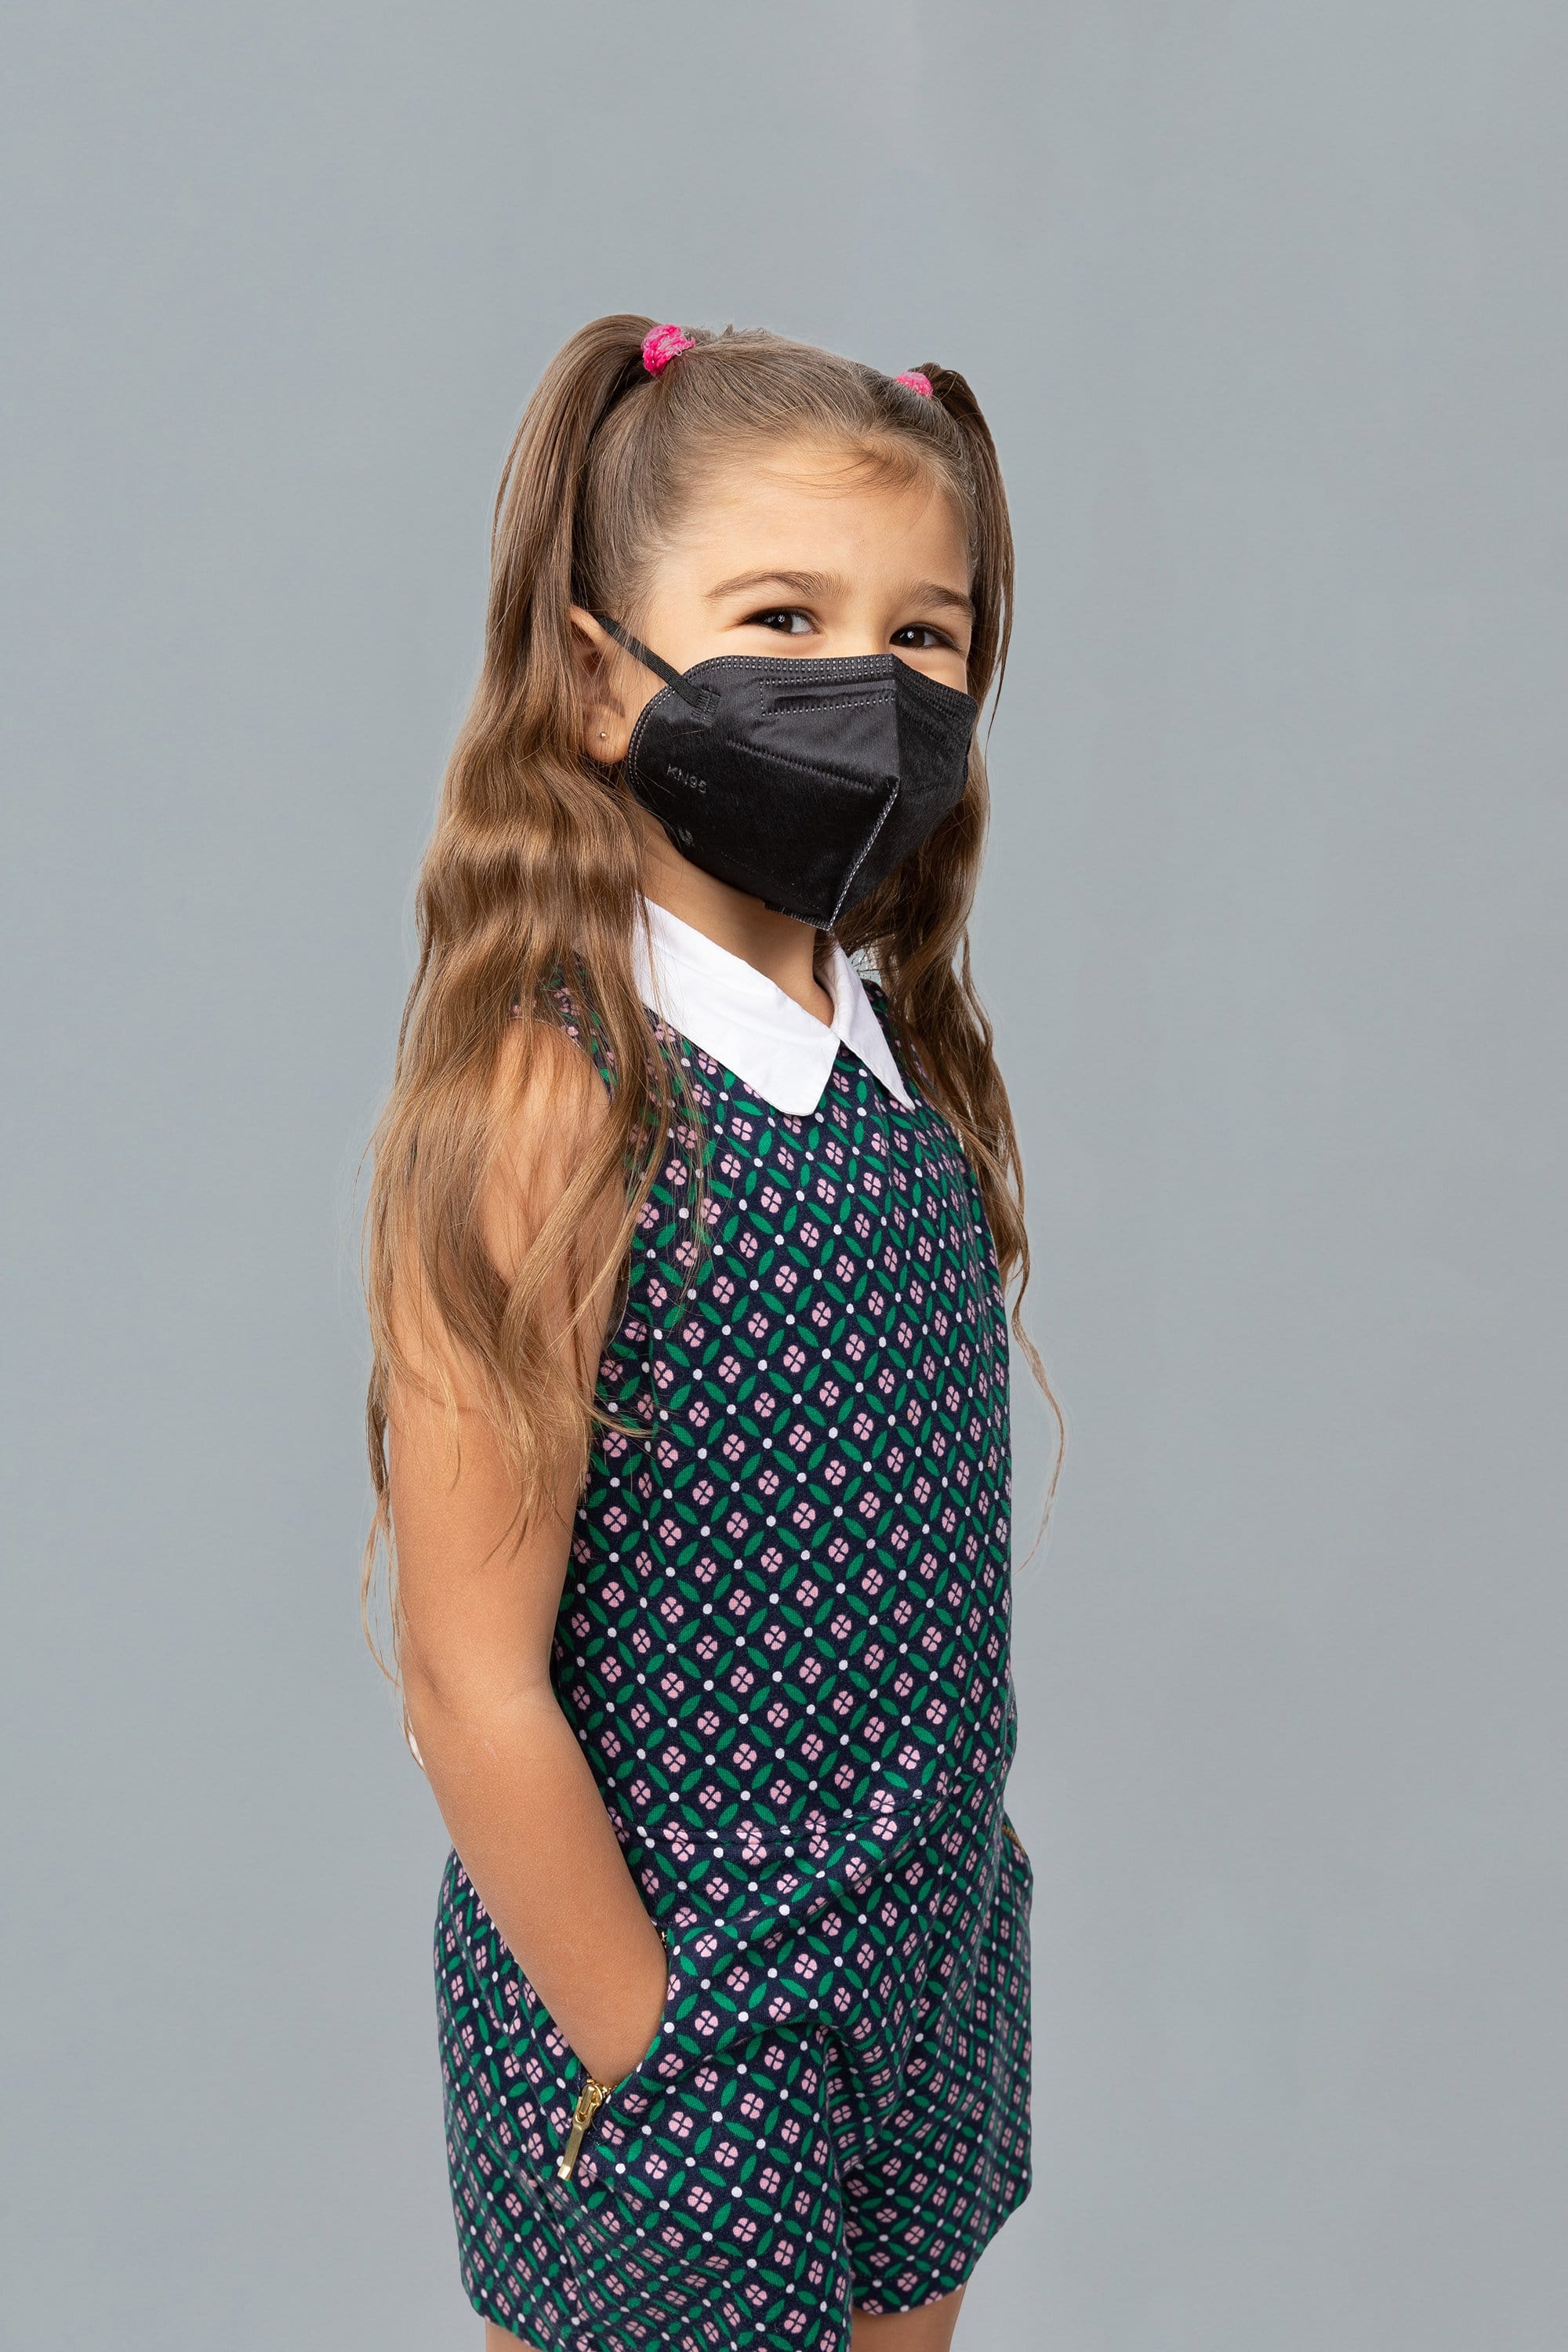 Child wearing stylish kid sized Black KN95 face mask, with high quality breathable fabric. 